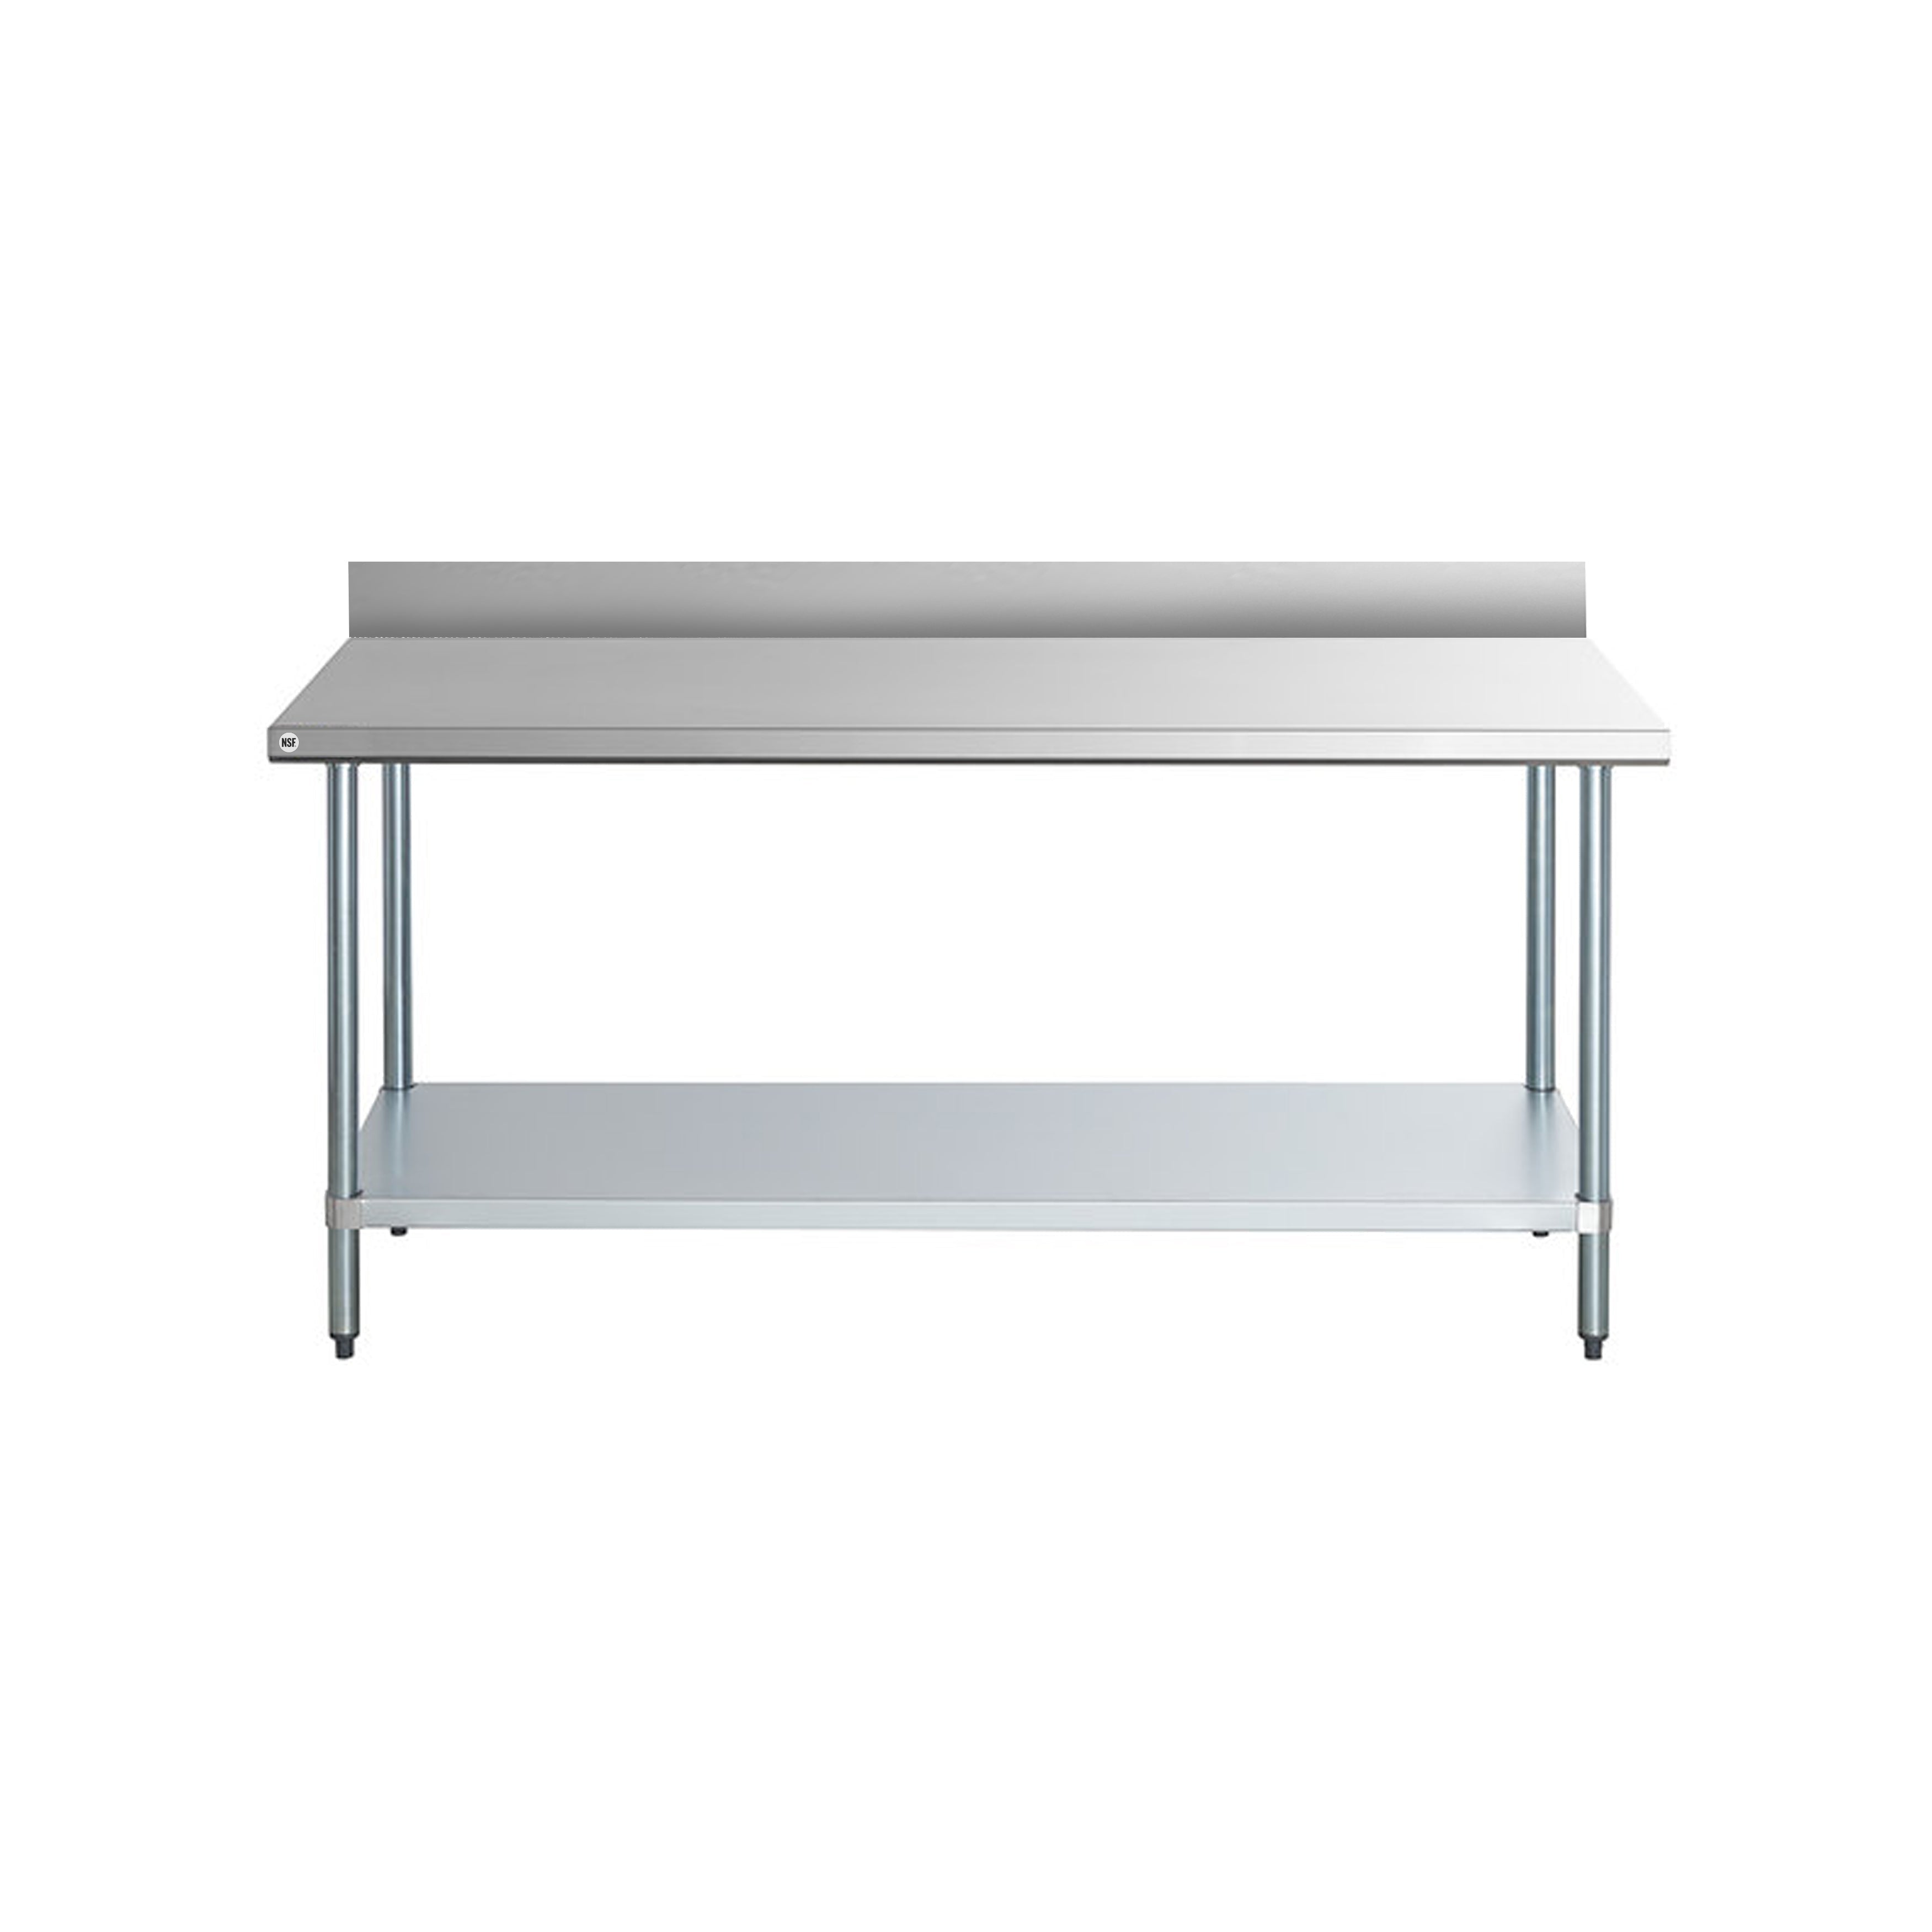 Omcan - 23806, Commercial 84" x 30" Stainless Steel Kitchen Work Table with 4" Back Splash 1600lbs Medium Duty